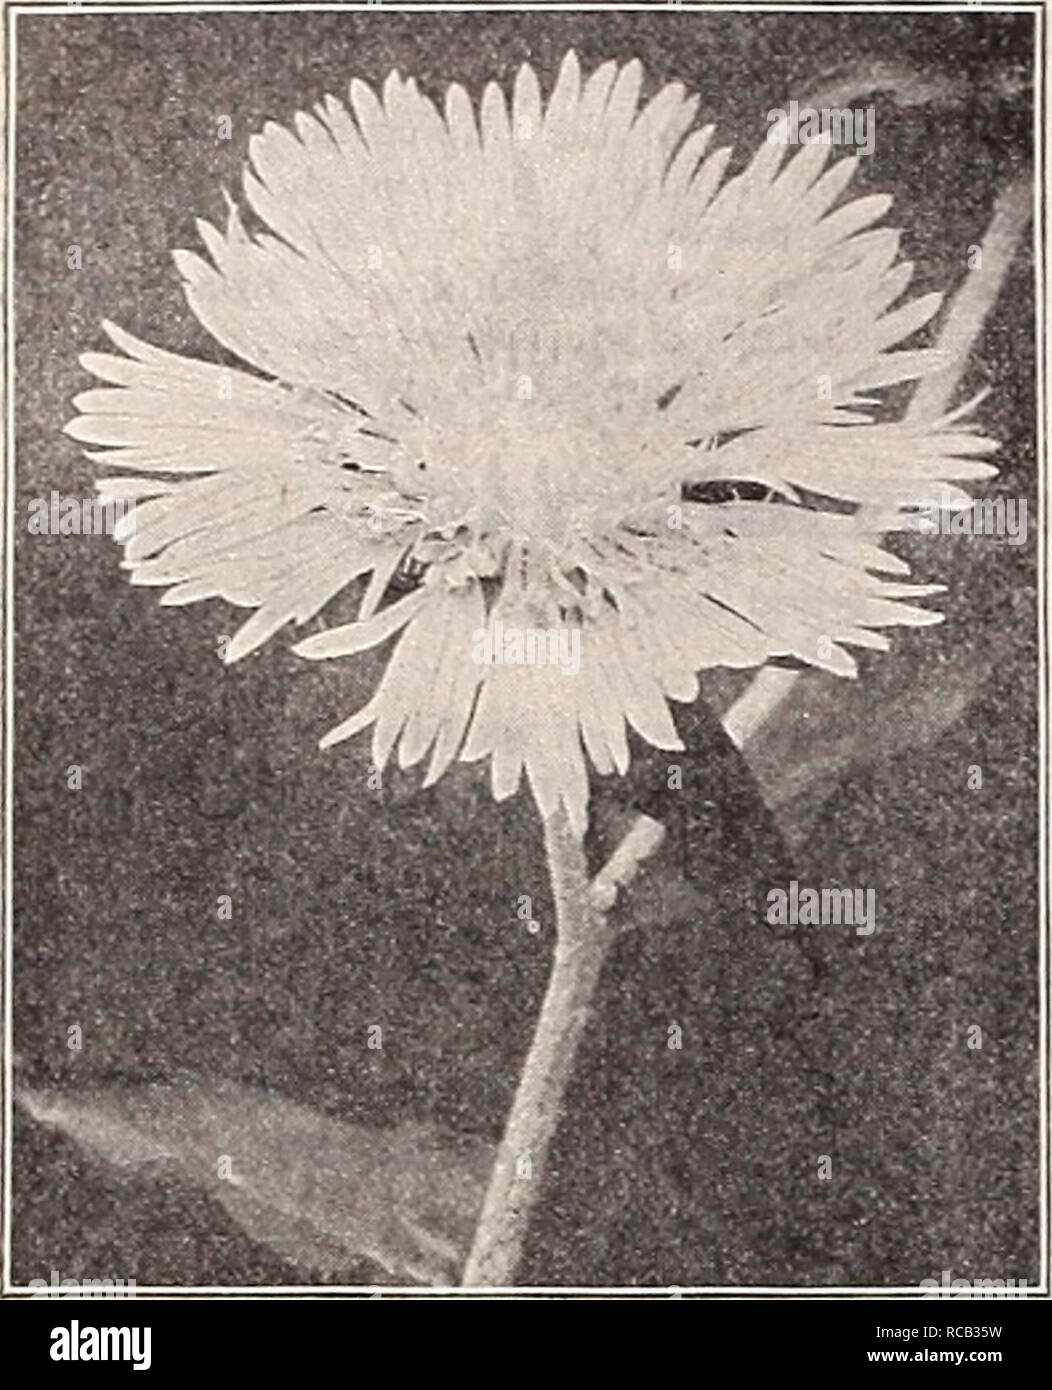 . Dreer's 1909 garden book. Seeds Catalogs; Nursery stock Catalogs; Gardening Equipment and supplies Catalogs; Flowers Seeds Catalogs; Vegetables Seeds Catalogs; Fruit Seeds Catalogs. -HEMRYADRKR ^HILADELPHIA^A&quot; NEW*&quot; RARE PLANTS. Stokesia Cyanea Alba. CHOICE NEW TROLLIUS OK GLOBE FLOWERS. Great improvements on existing varieties, all of strong growth and with flowers of very large size. Gotterf unke. Large, open orange-y e 1 1 o w flowers. Helios. Pure yellow. Very free-flowering on strong branched stems. Leuchtkugel. One of the finest deep orange reds. Lichtball. Extra large globul Stock Photo